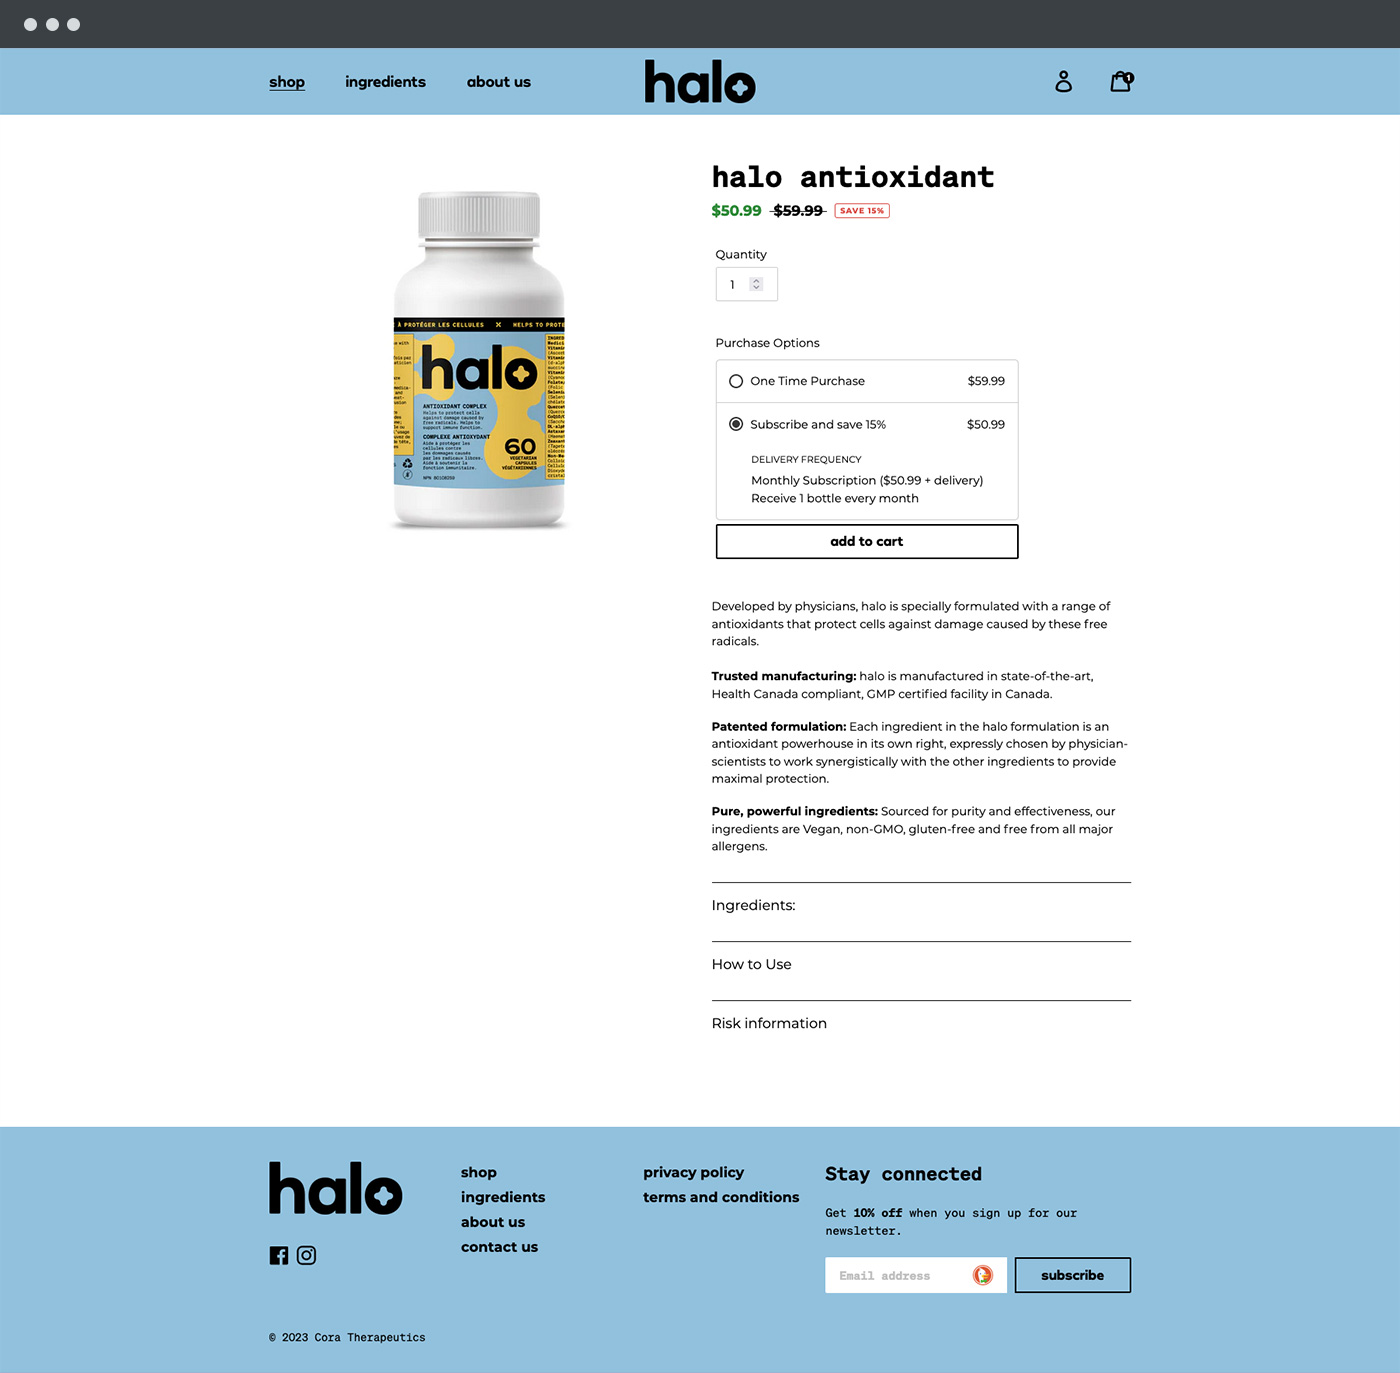 halo Shopify product page design